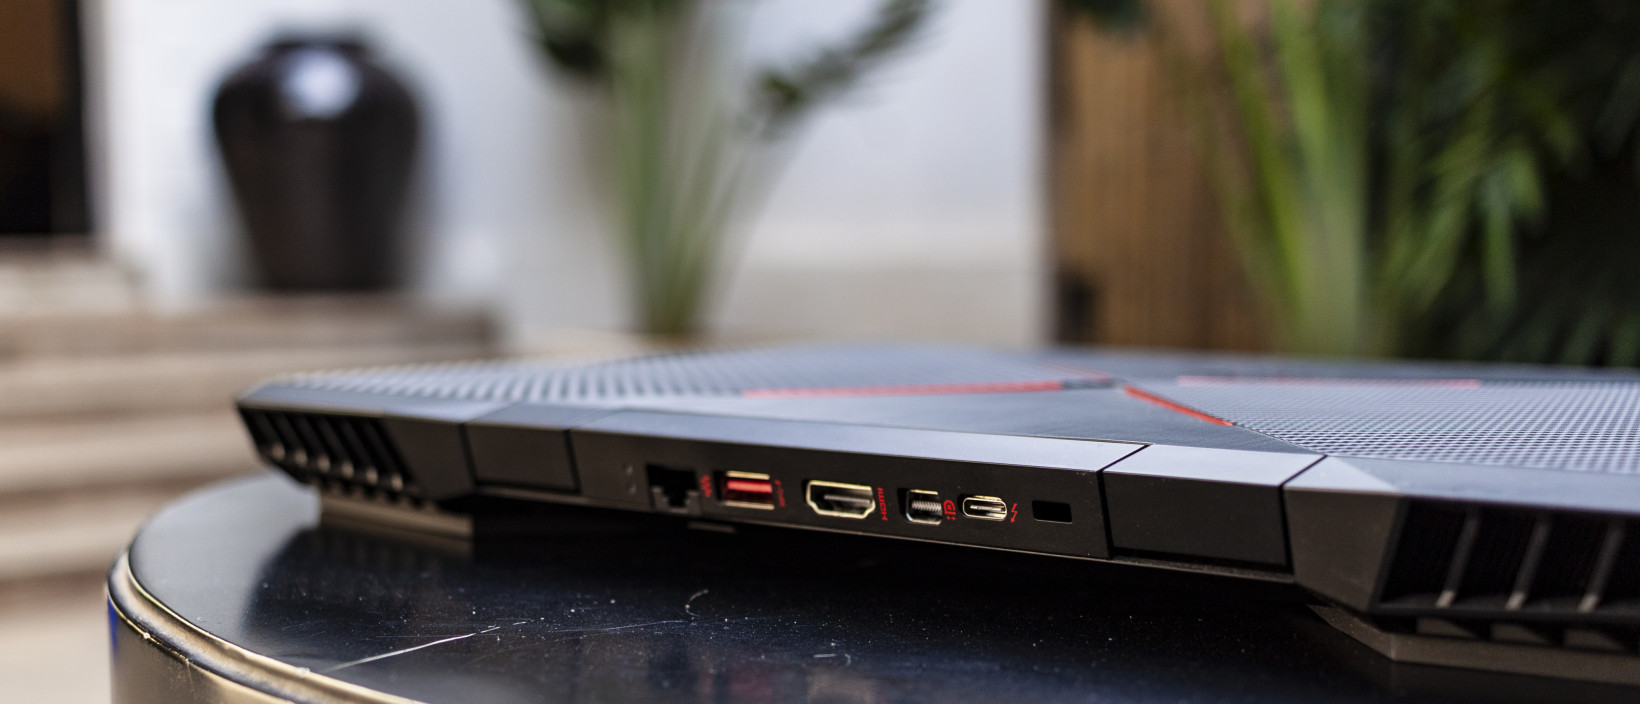 HP cleverly placed the Omen's ports at the back, so you don't have to see a mess of cables on your desk all the time